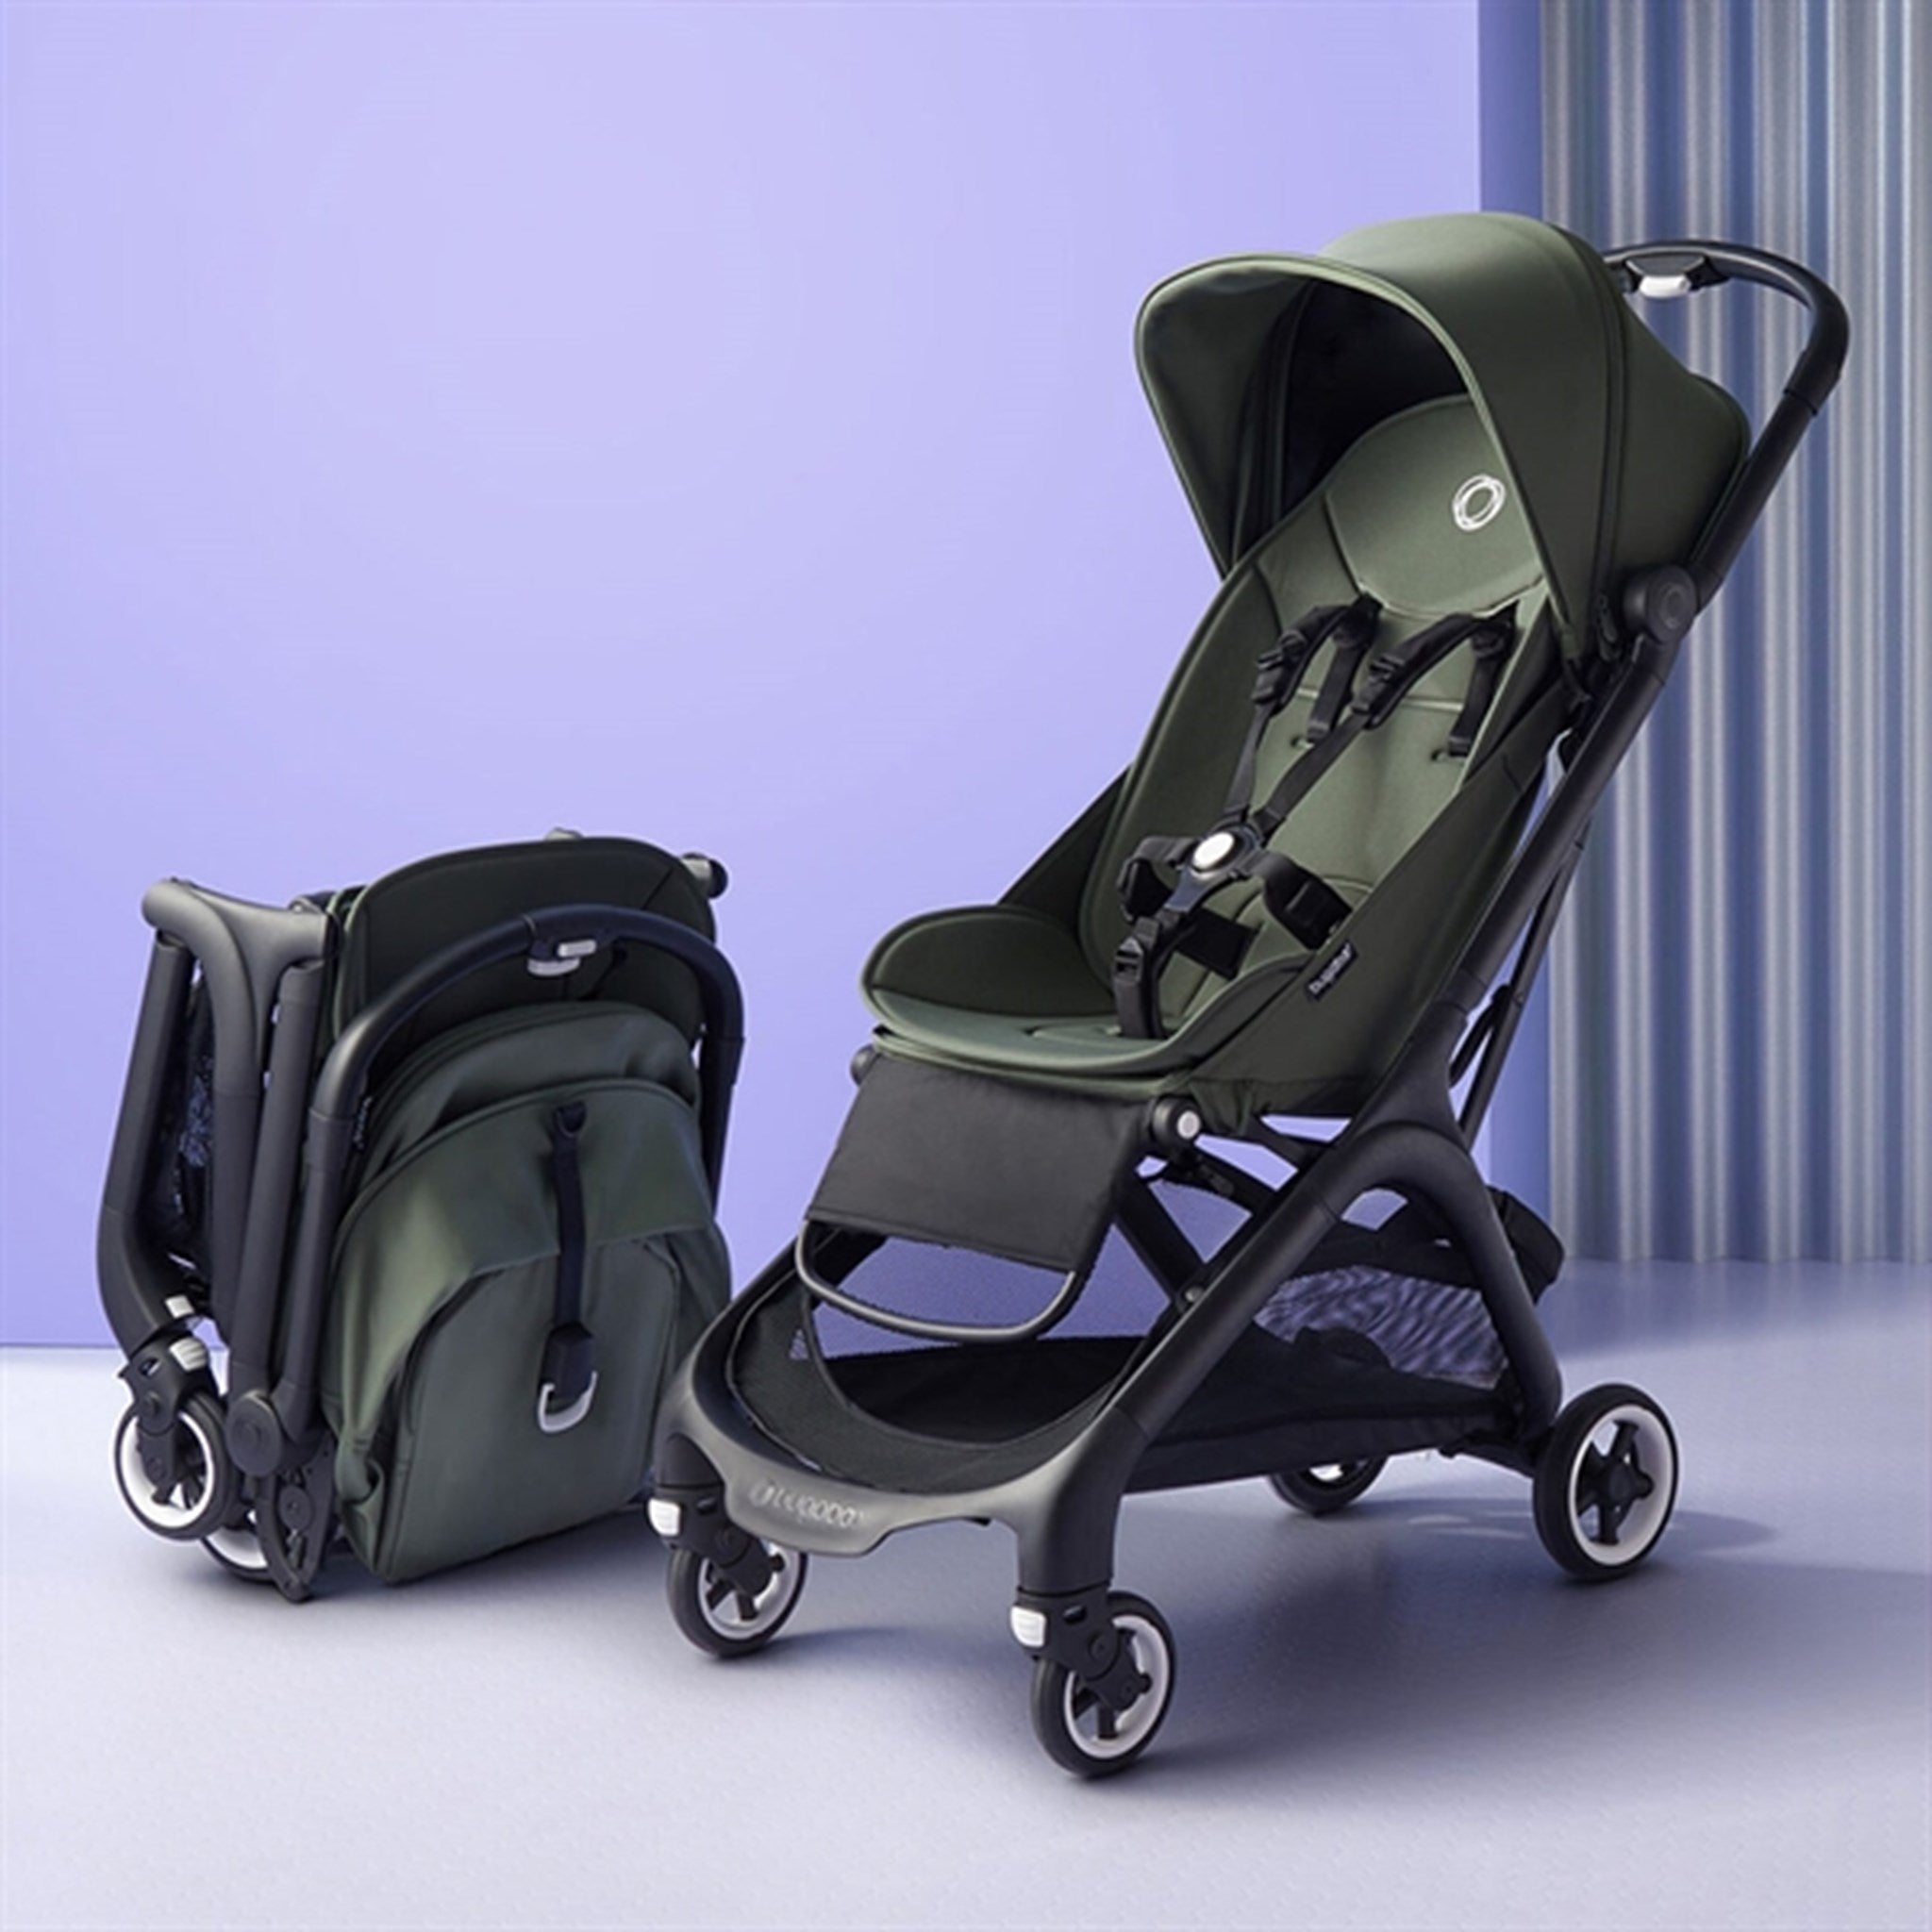 Bugaboo Butterfly Forest Green - LIVETILBUD 2